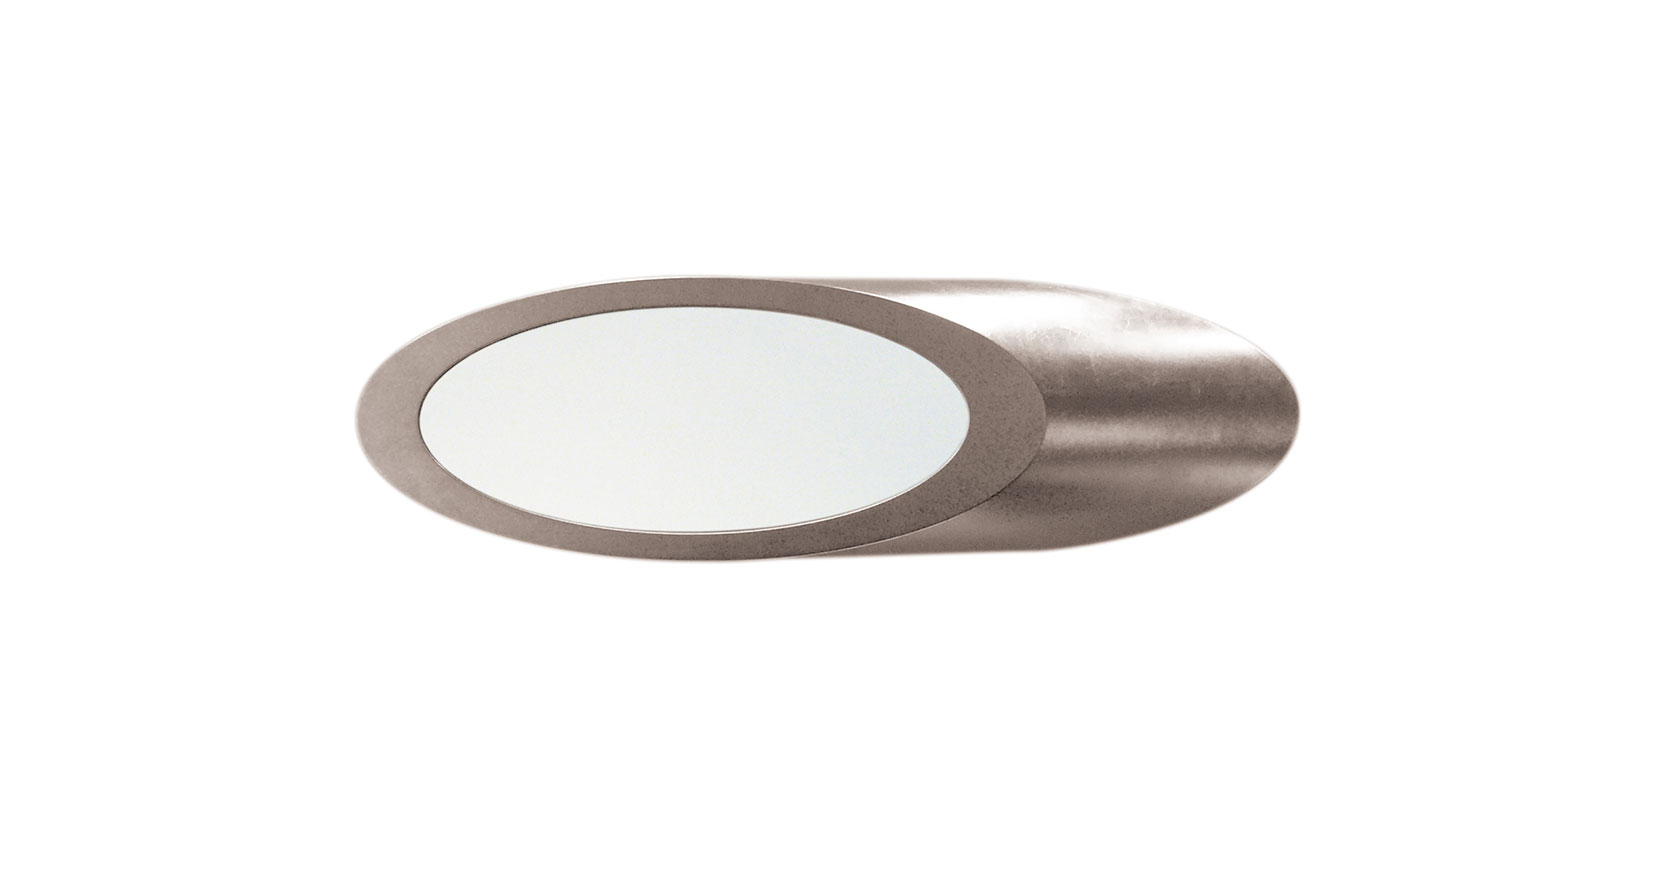 Matt Sindall, futurist horizontal mirror with the shape of a spatial porthole surrounded by silvered and smooth sculpted wood